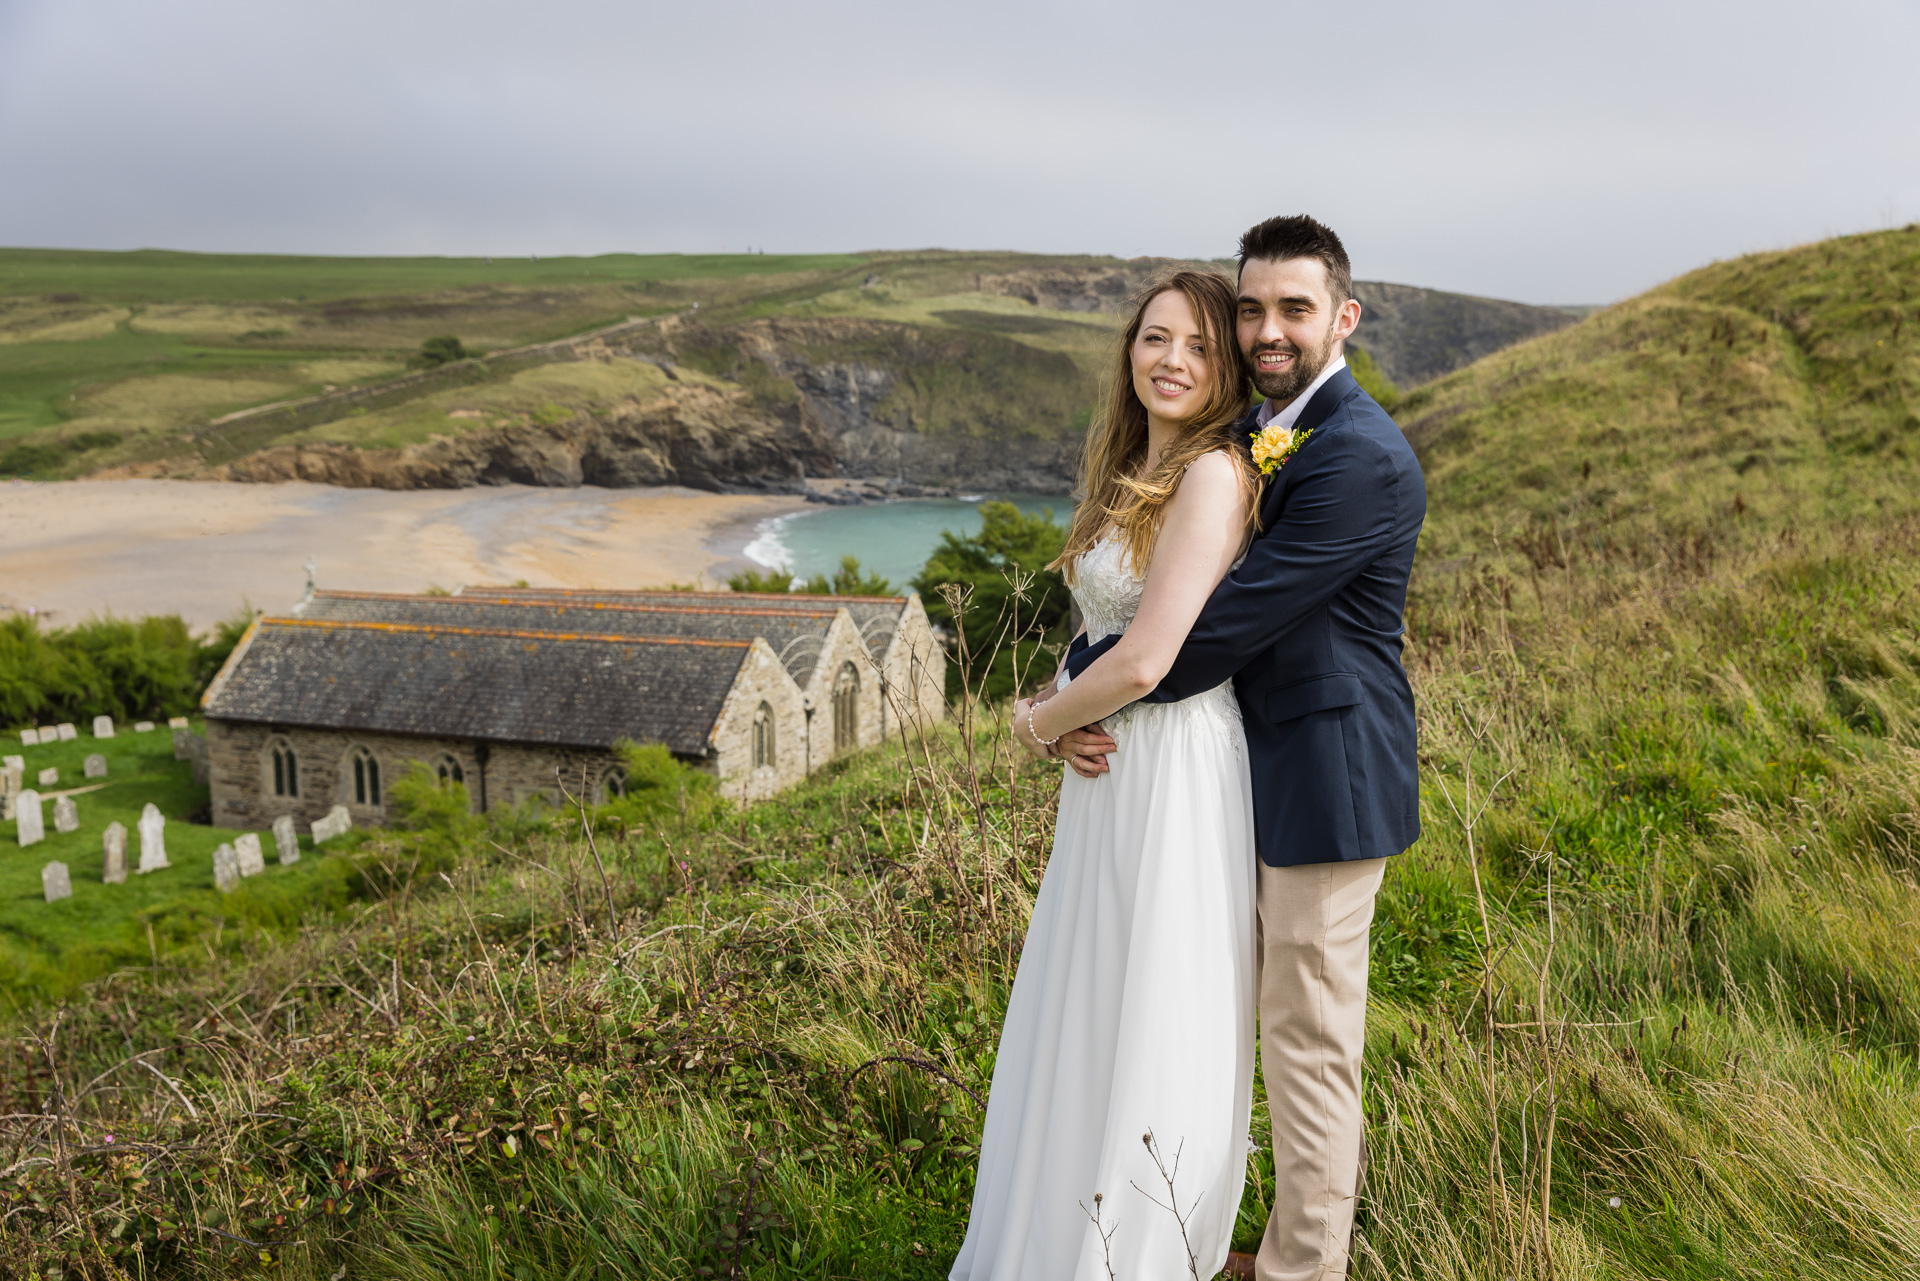 Wedding Photography of the Bride & Groom with Gunwalloe Church and the Beach in the background.